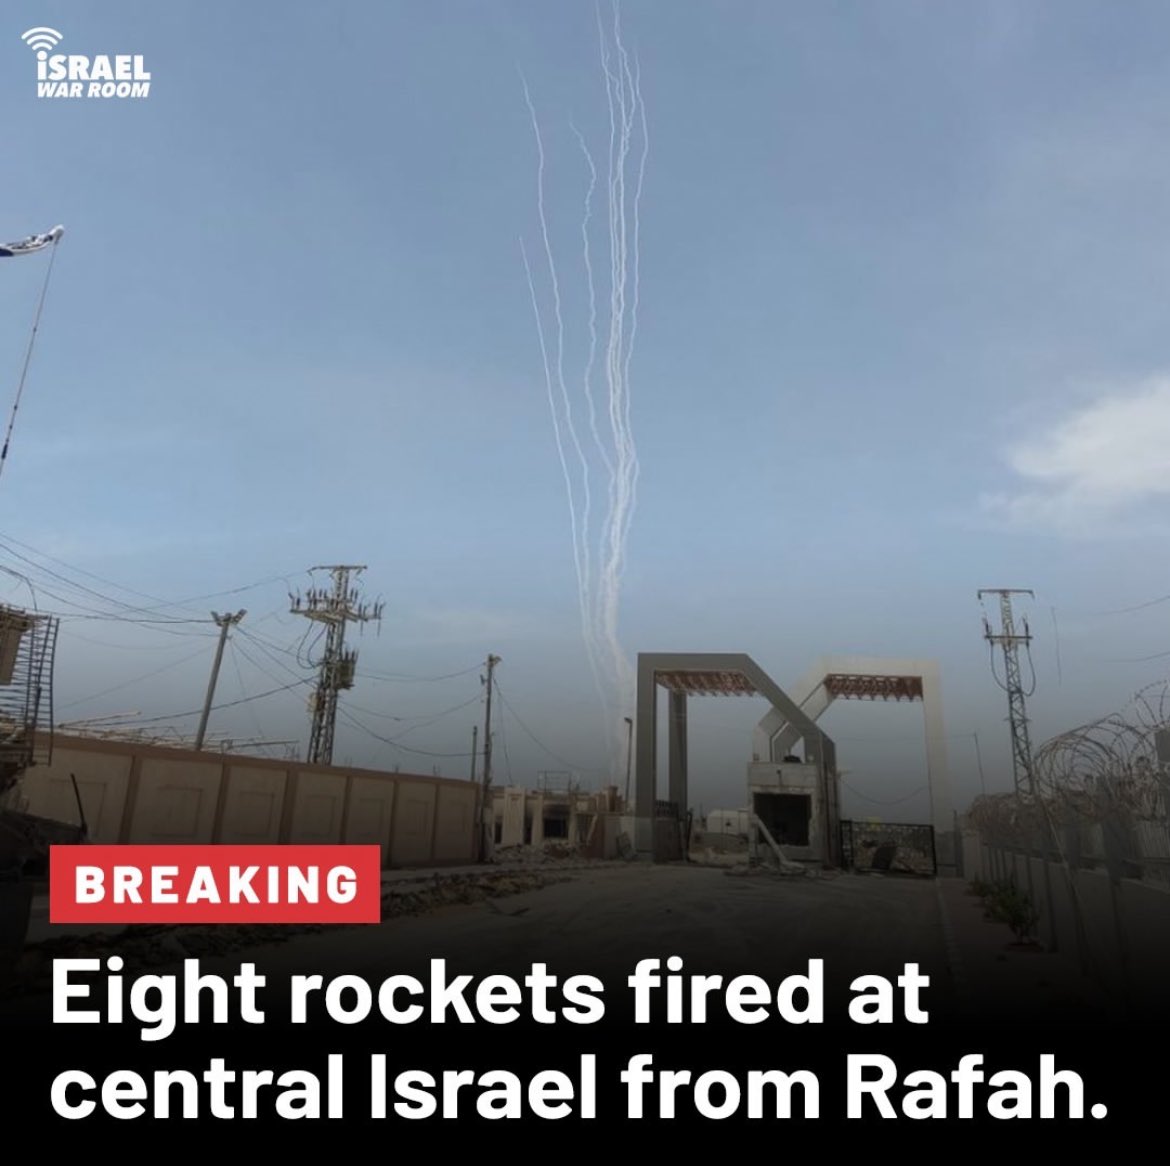 Go ahead and tell me again how Israel has no right to send its military into Rafah.